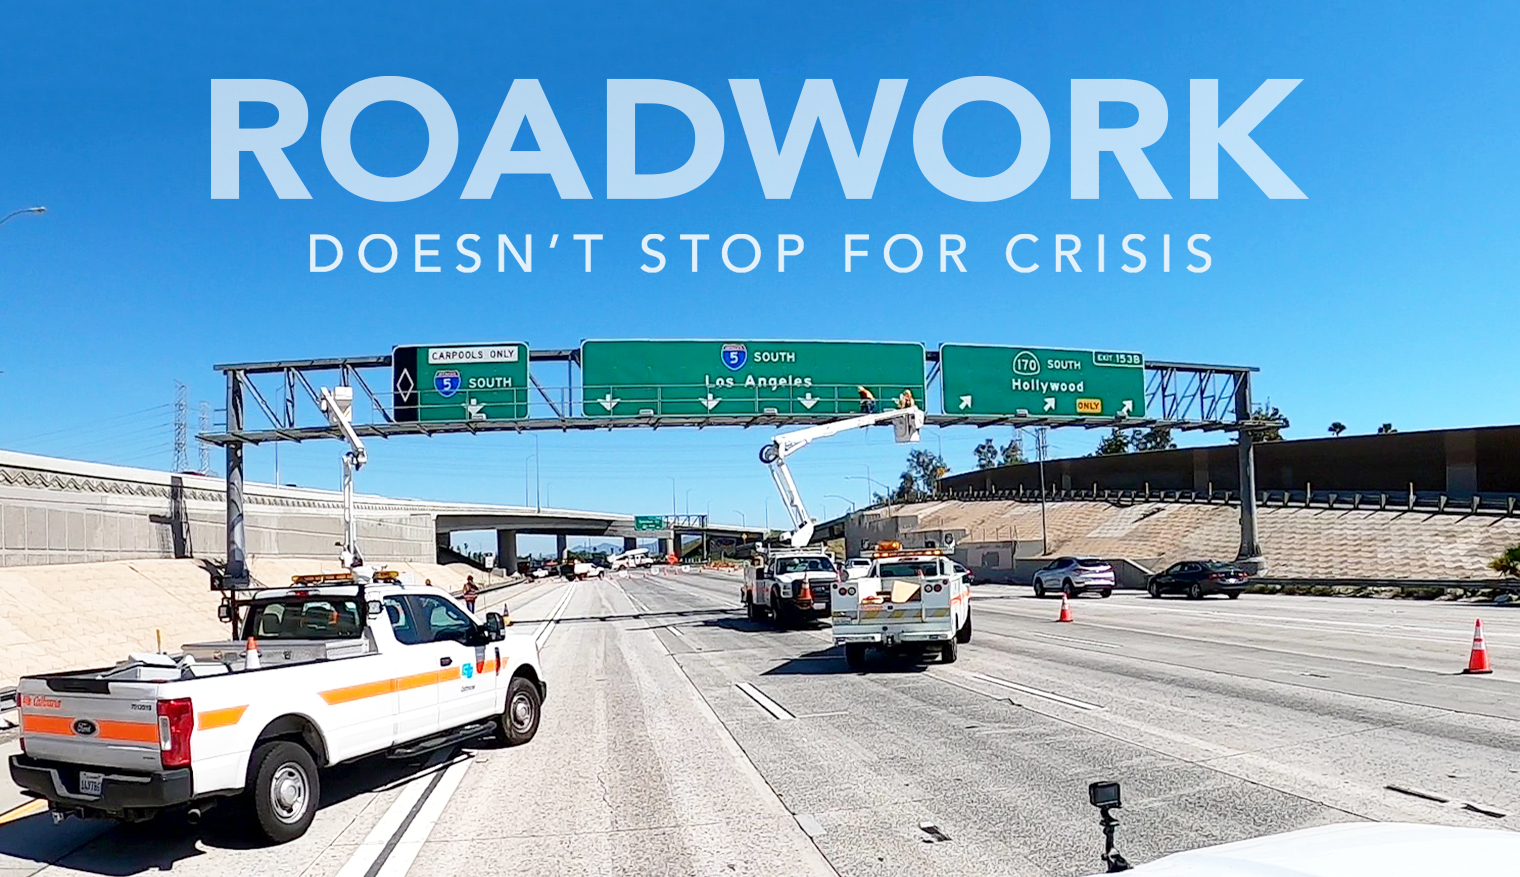 Lead photo says "Roadwork Doesn't Stop for Crisis." Photo depicts Caltrans workers doing work on road signs after the freeway had been shut down.